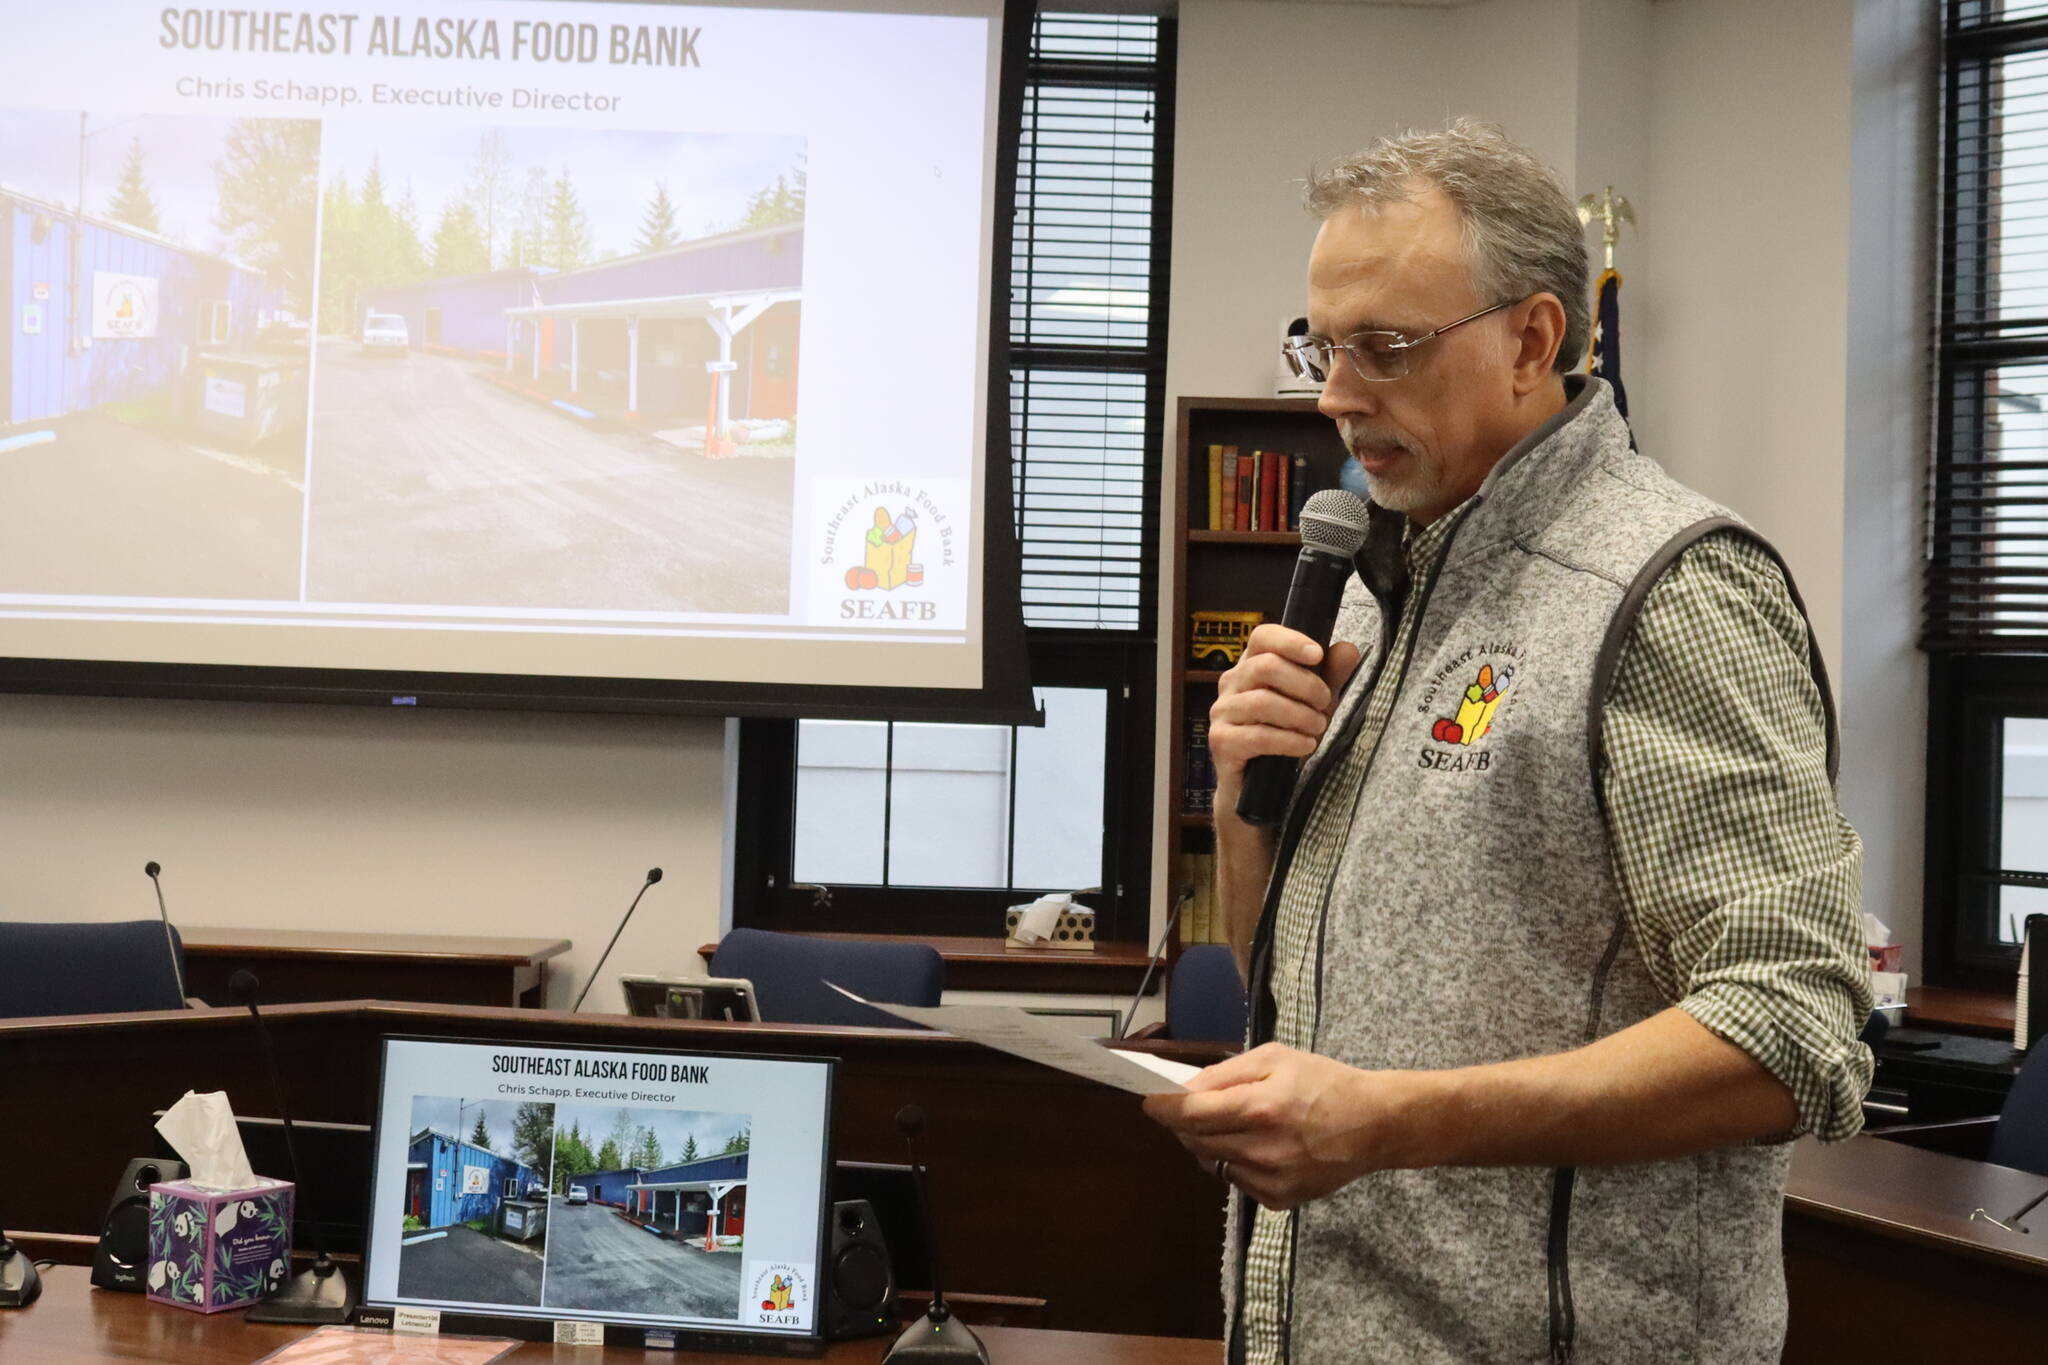 Chris Schapp, executive director of the Southeast Alaska Food Bank, discusses record demand during the past year and steps the organization is trying to do to help those in need during a presentation Monday at the Alaska State Capitol. (Mark Sabbatini / Juneau Empire)